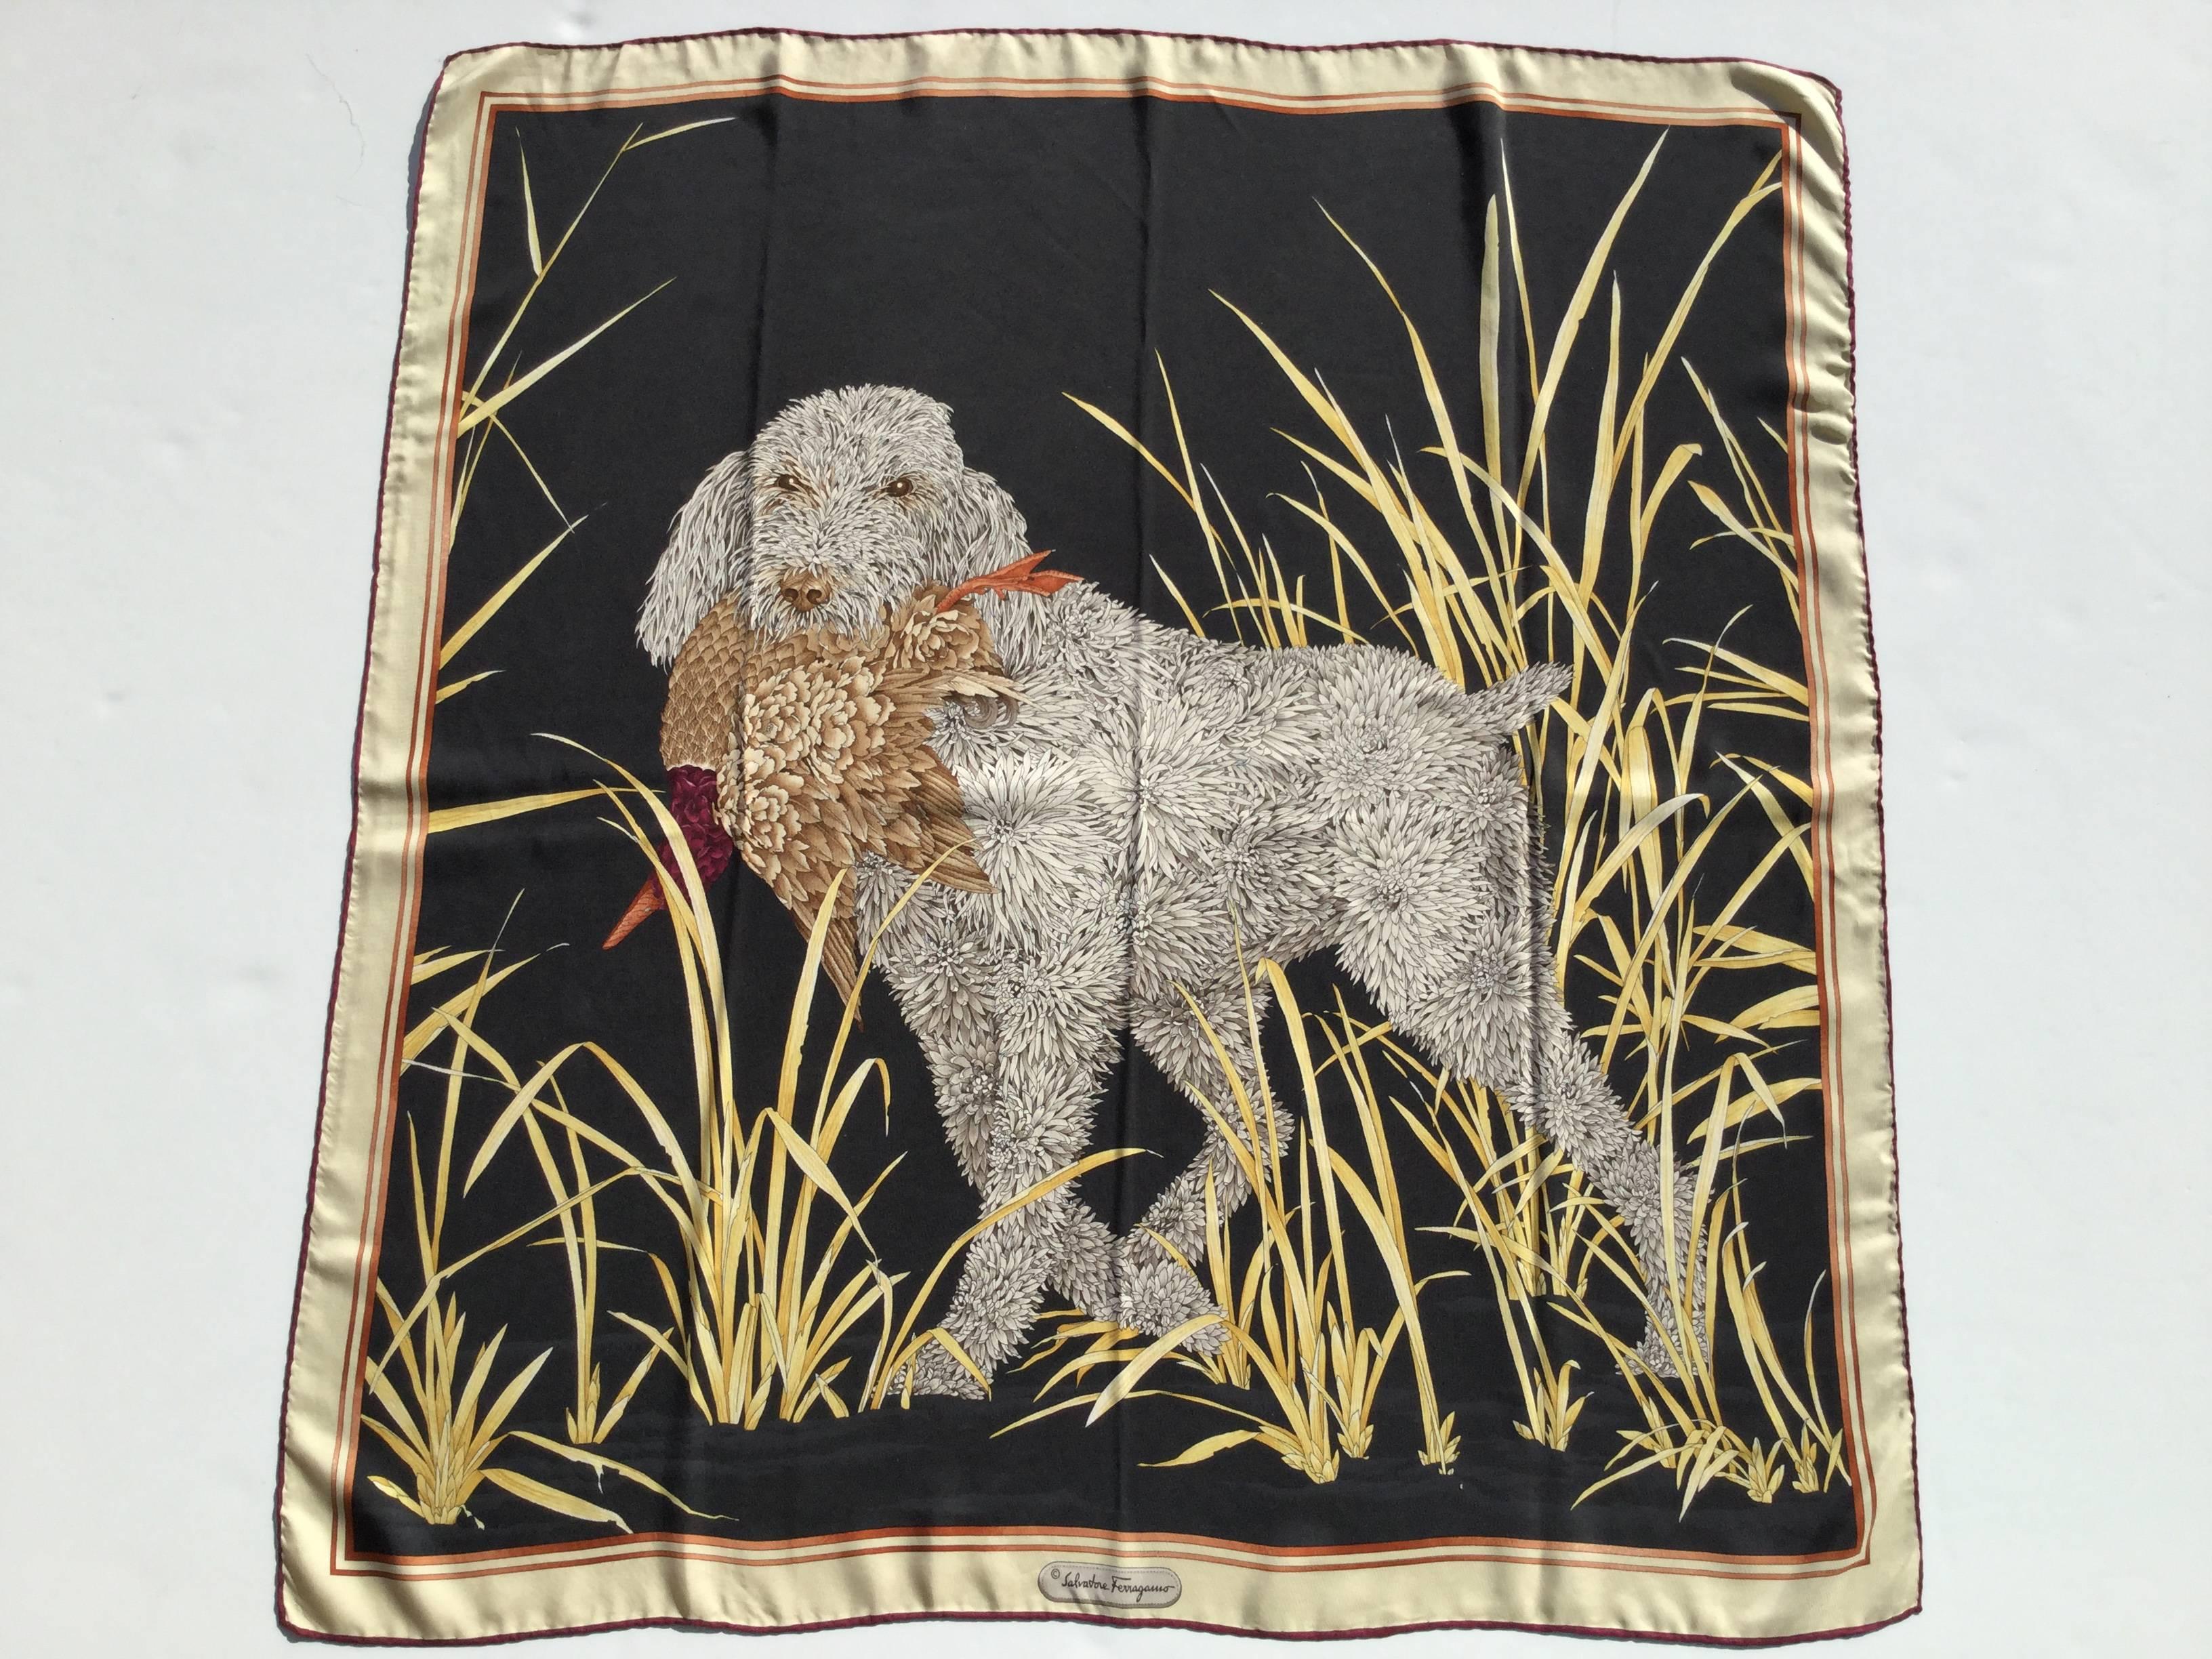 This Ferragamo scarf is so amazing!  The dog's fur is totally comprised of
white carnation flowers. The detail is simply stunning. It is 32 inches by 32 inches; so large enough to be worn as a shawl. Hand rolled edges. 100% Silk.
Incredible